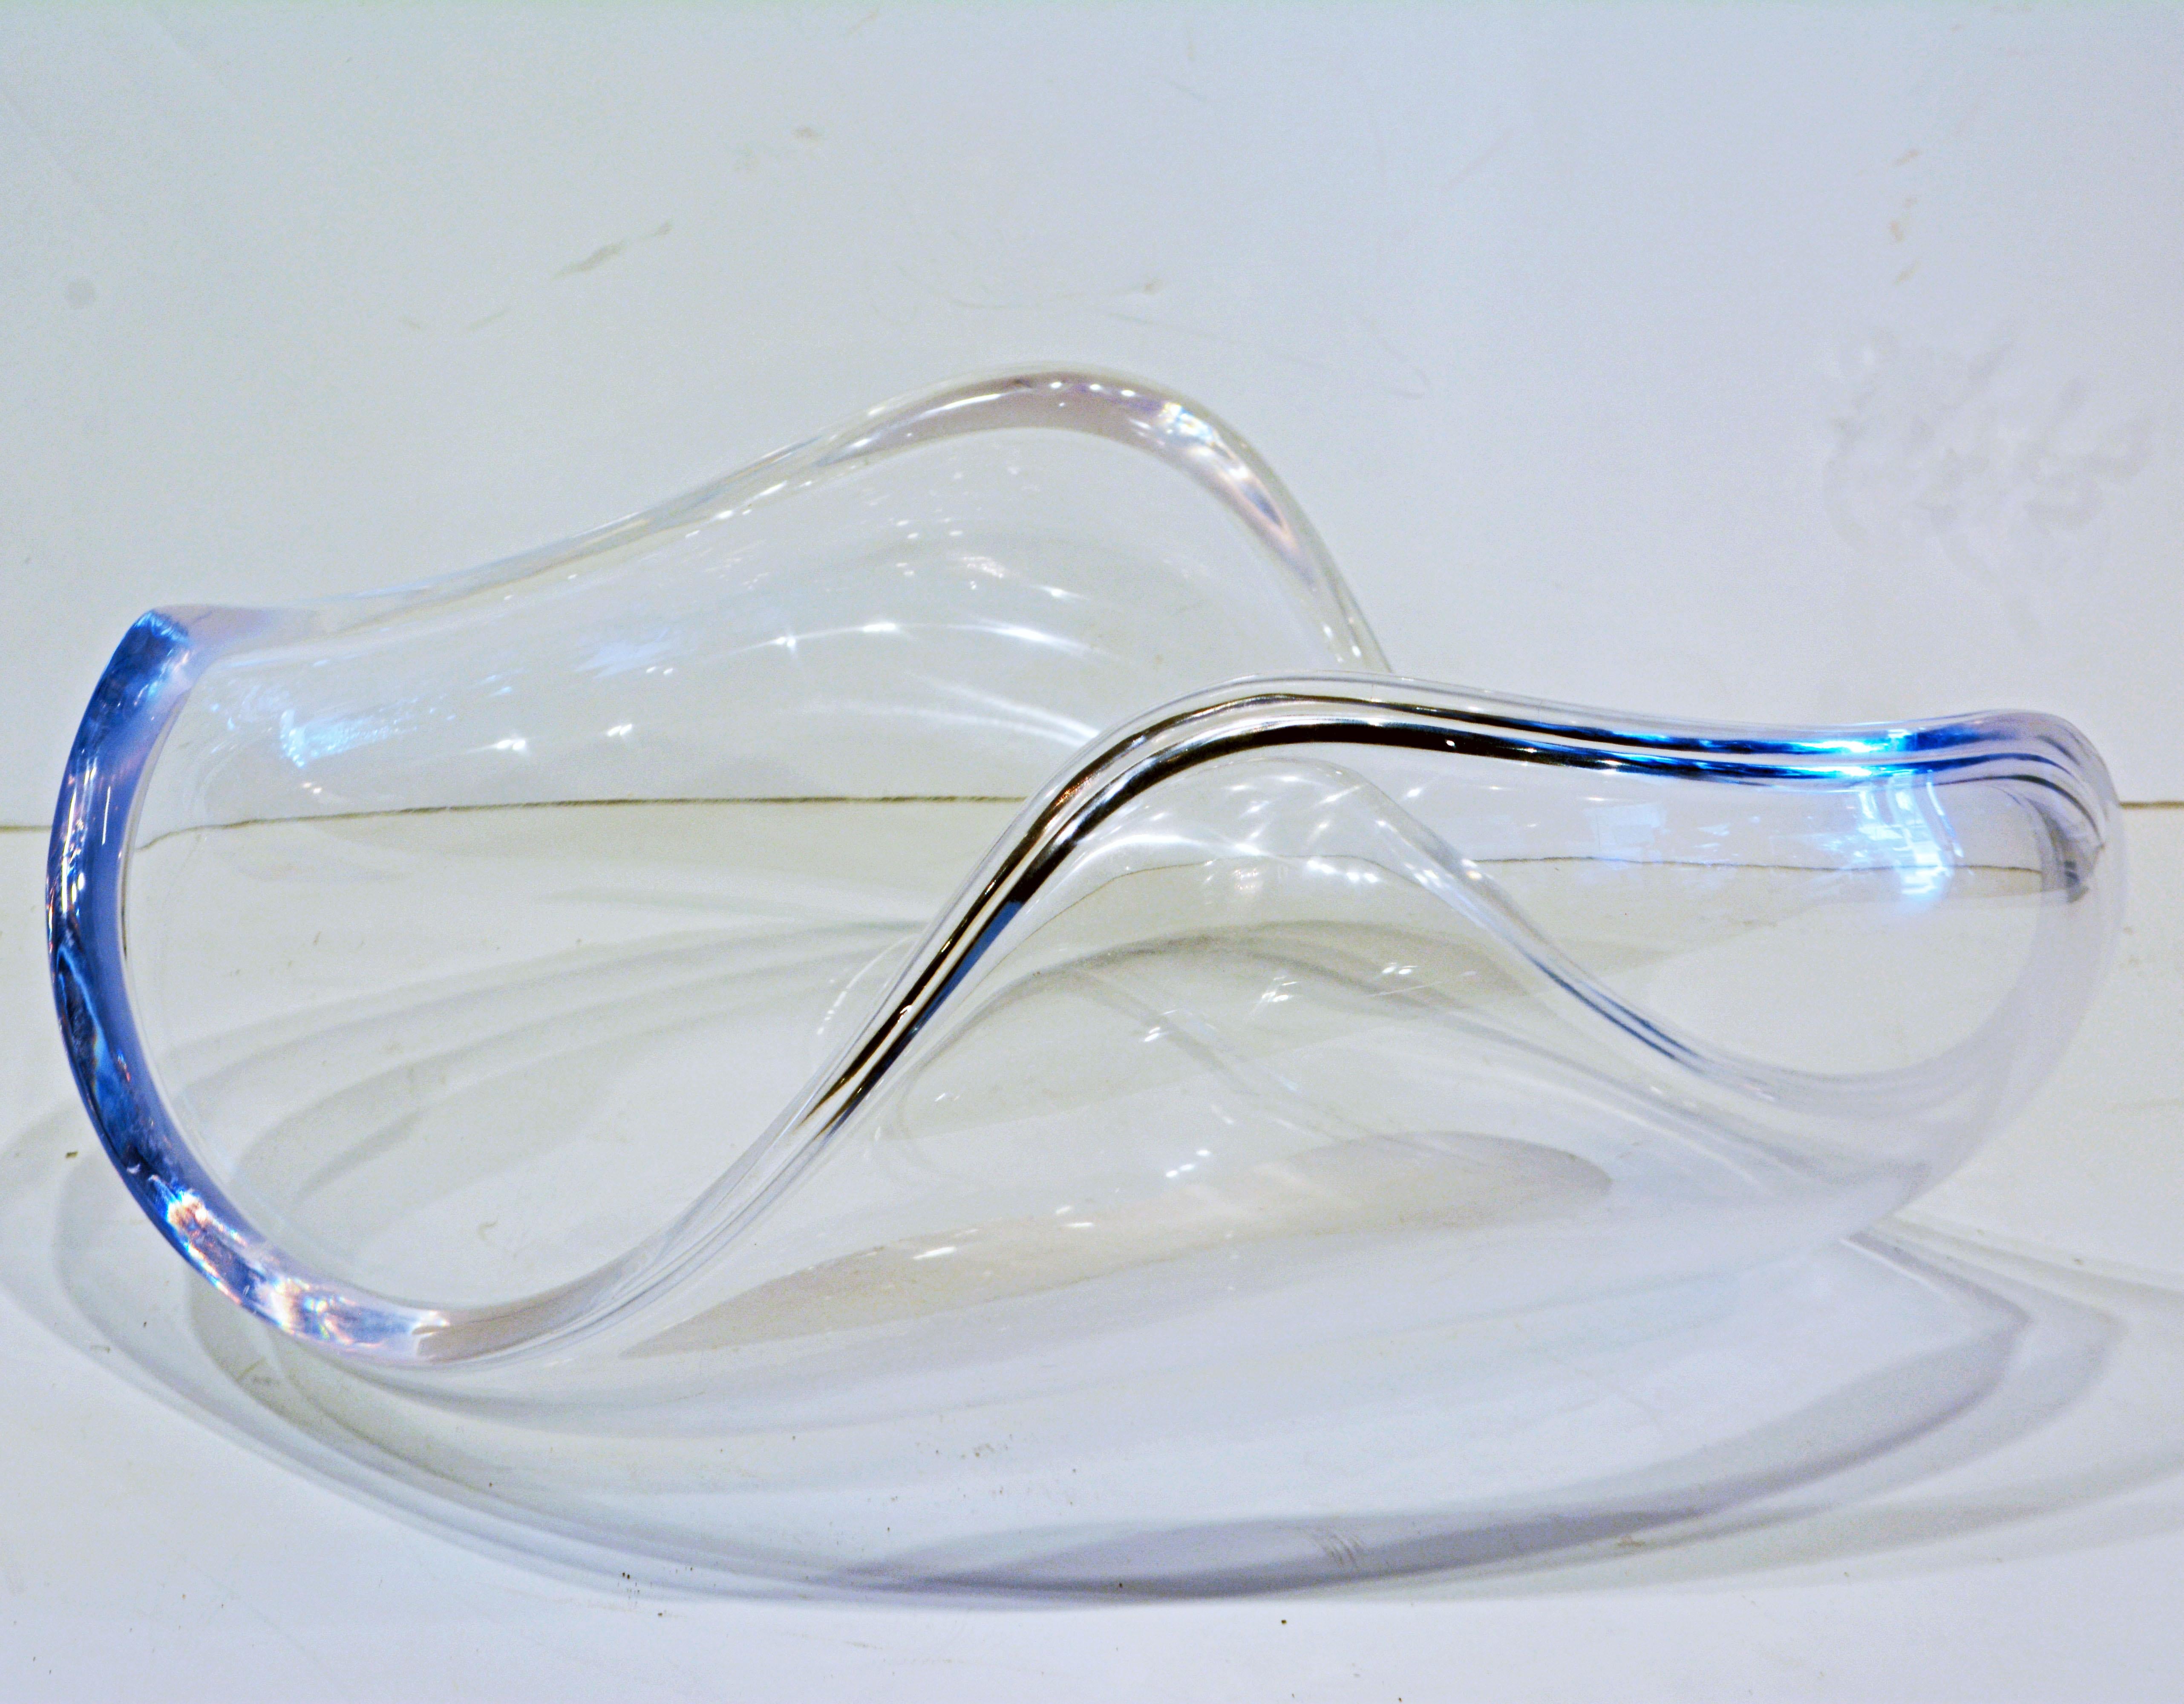 20th Century Large Lucite Biomorphic Freeform 'Astrolite' Bowl Attributed to Ritts Co. of LA